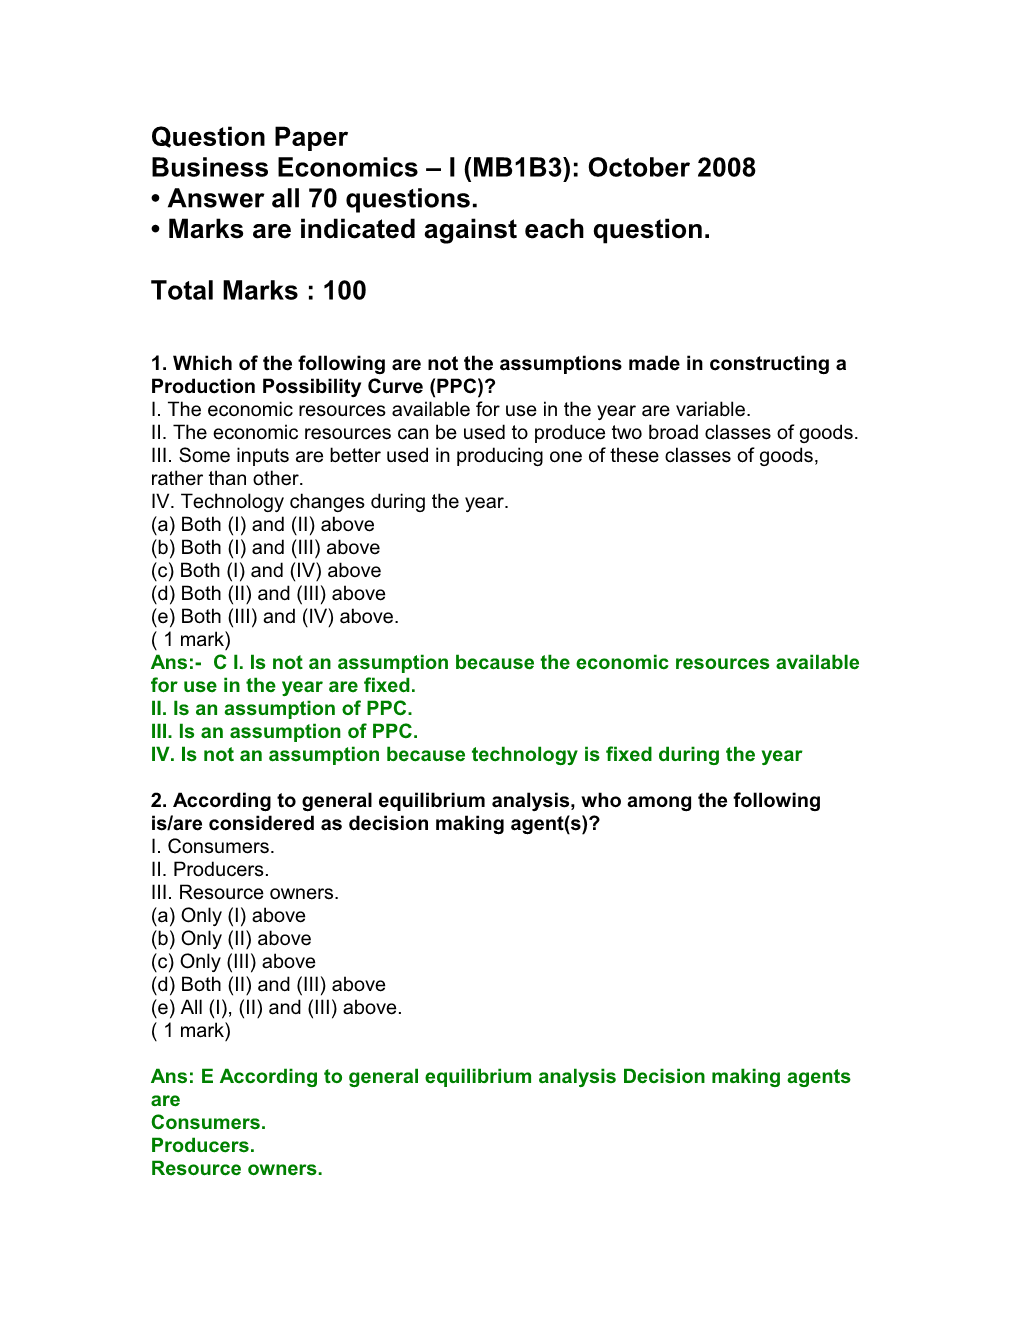 Question Paper Business Economics I (MB1B3): October 2008 Answer All 70 Questions. Marks